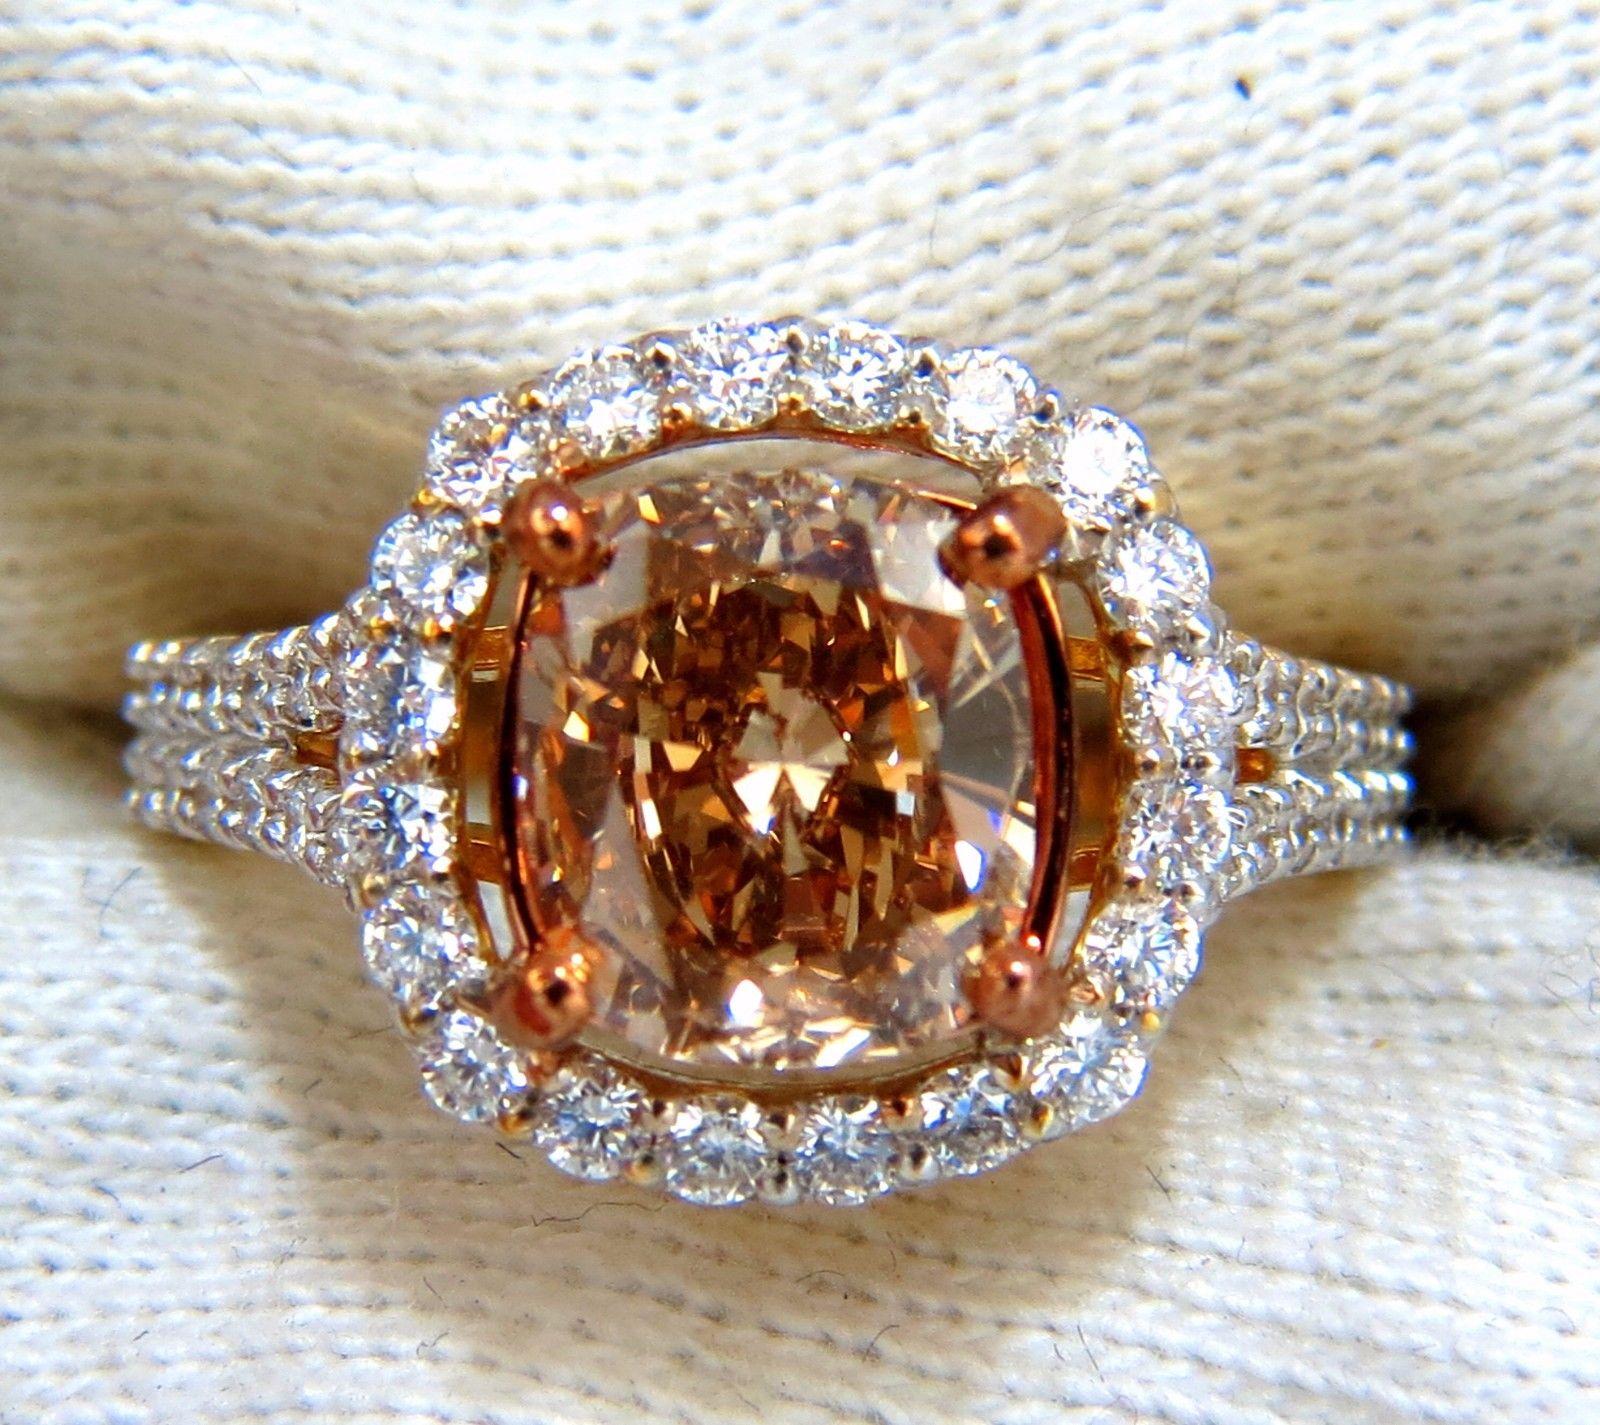 Everlasting Beauty

GIA 2.23ct Natural Fancy color  diamond ring.

Cushion, Brilliant

Natural, Fancy Brown Yellow, Even

Vs2 clarity

Report Id: 2181151677

Please see attached photo for report. 

.76ct. side round , full cut diamonds.

G-color